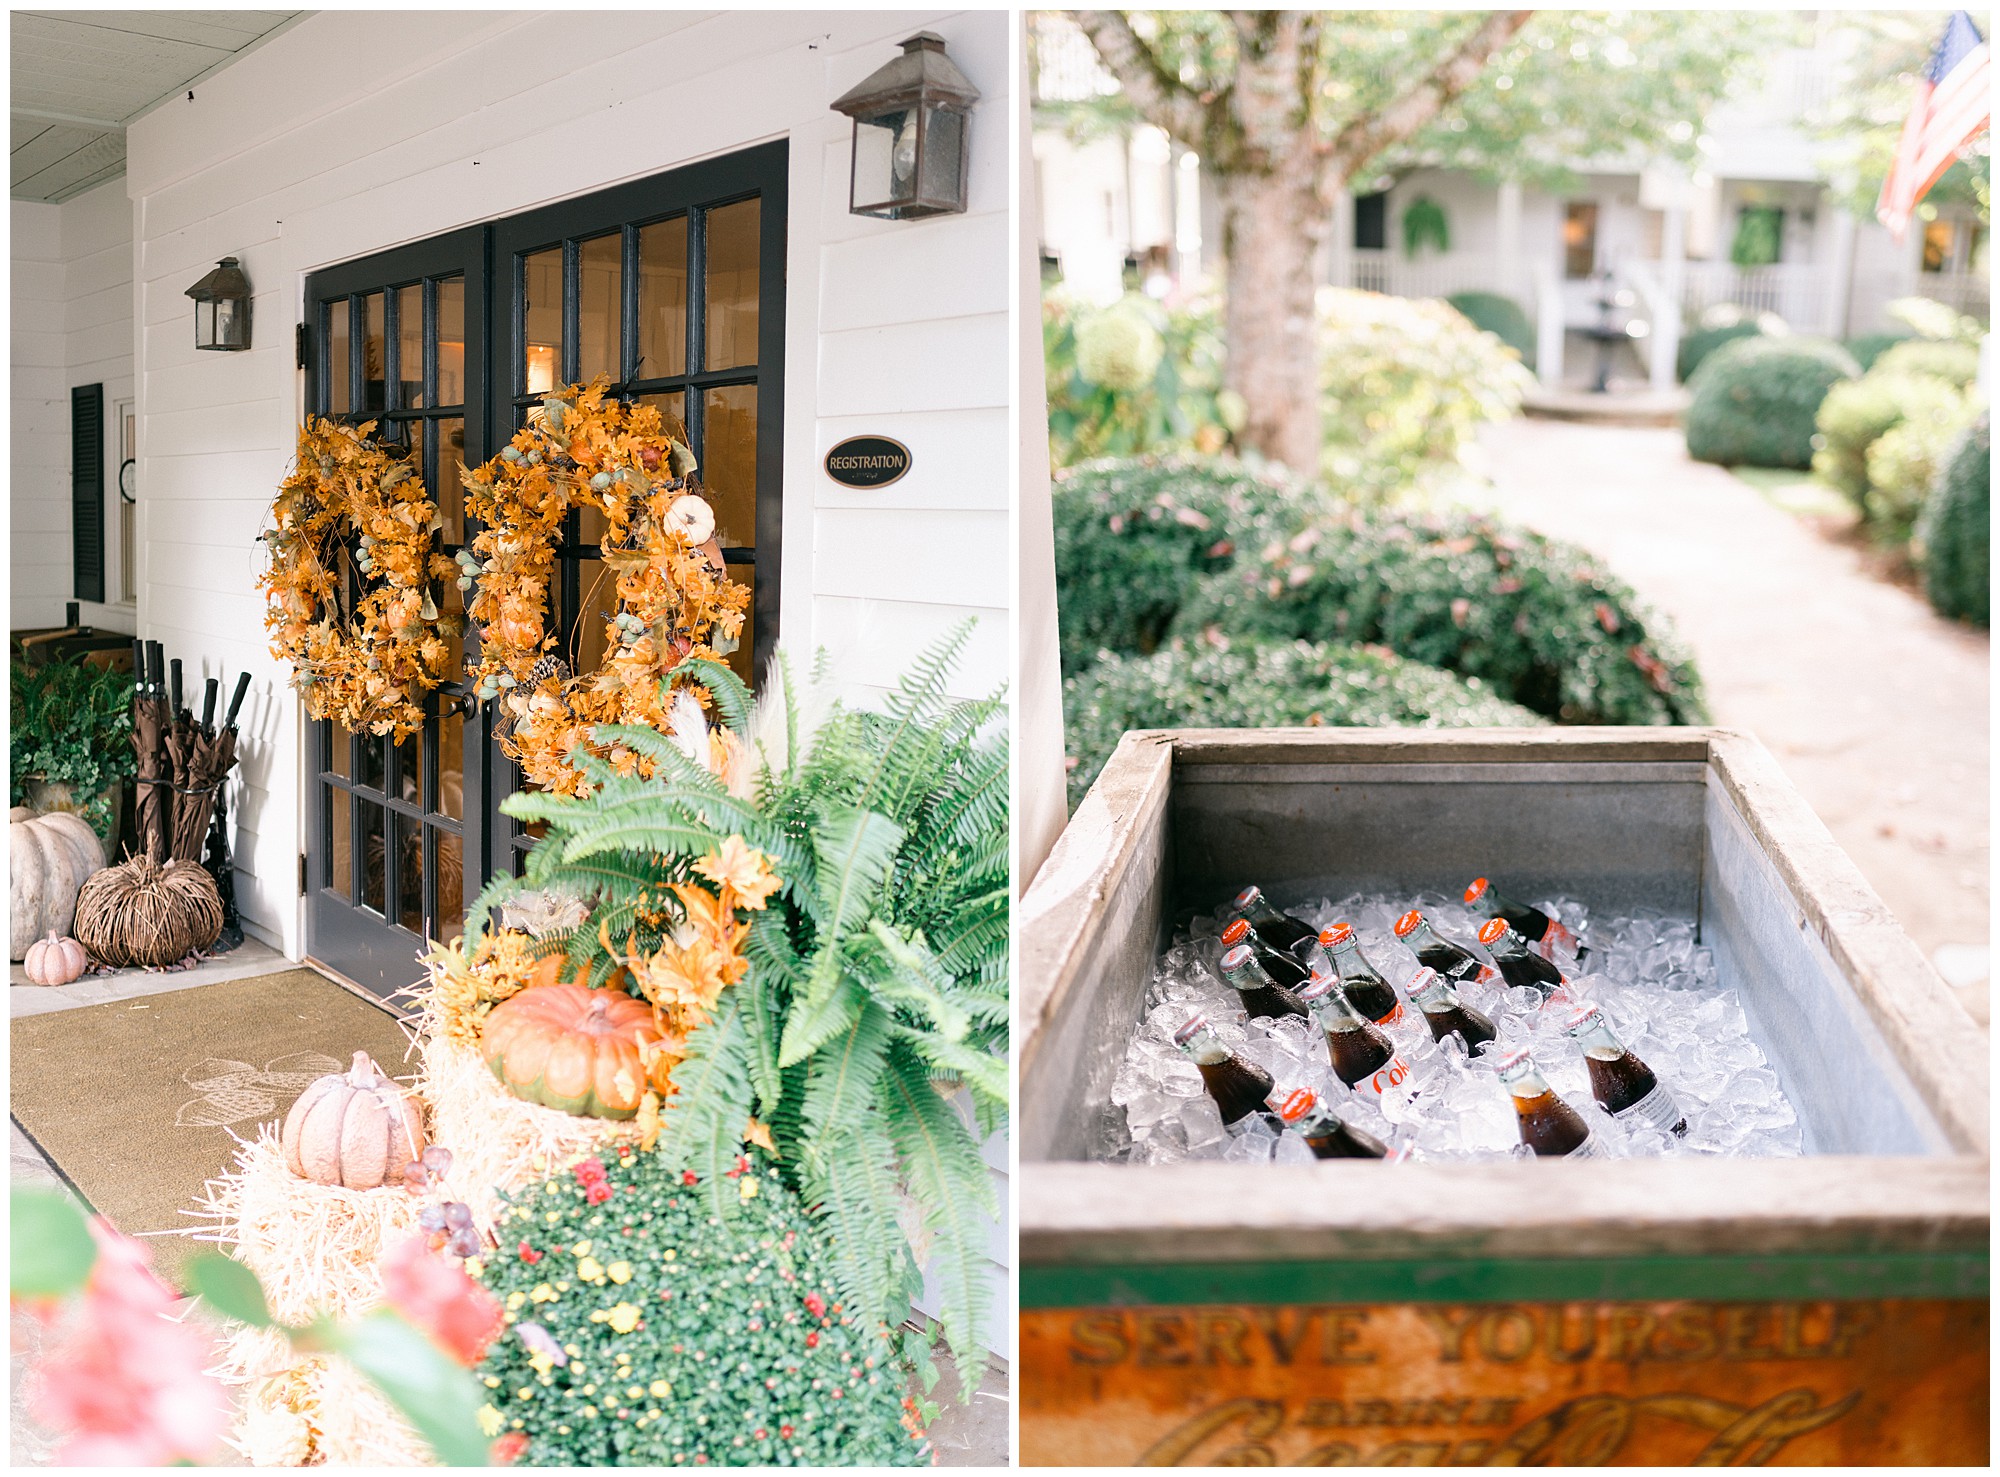 Entrance doors to Half Mile Farm decorated with fall wreaths and a vintage coke stand.